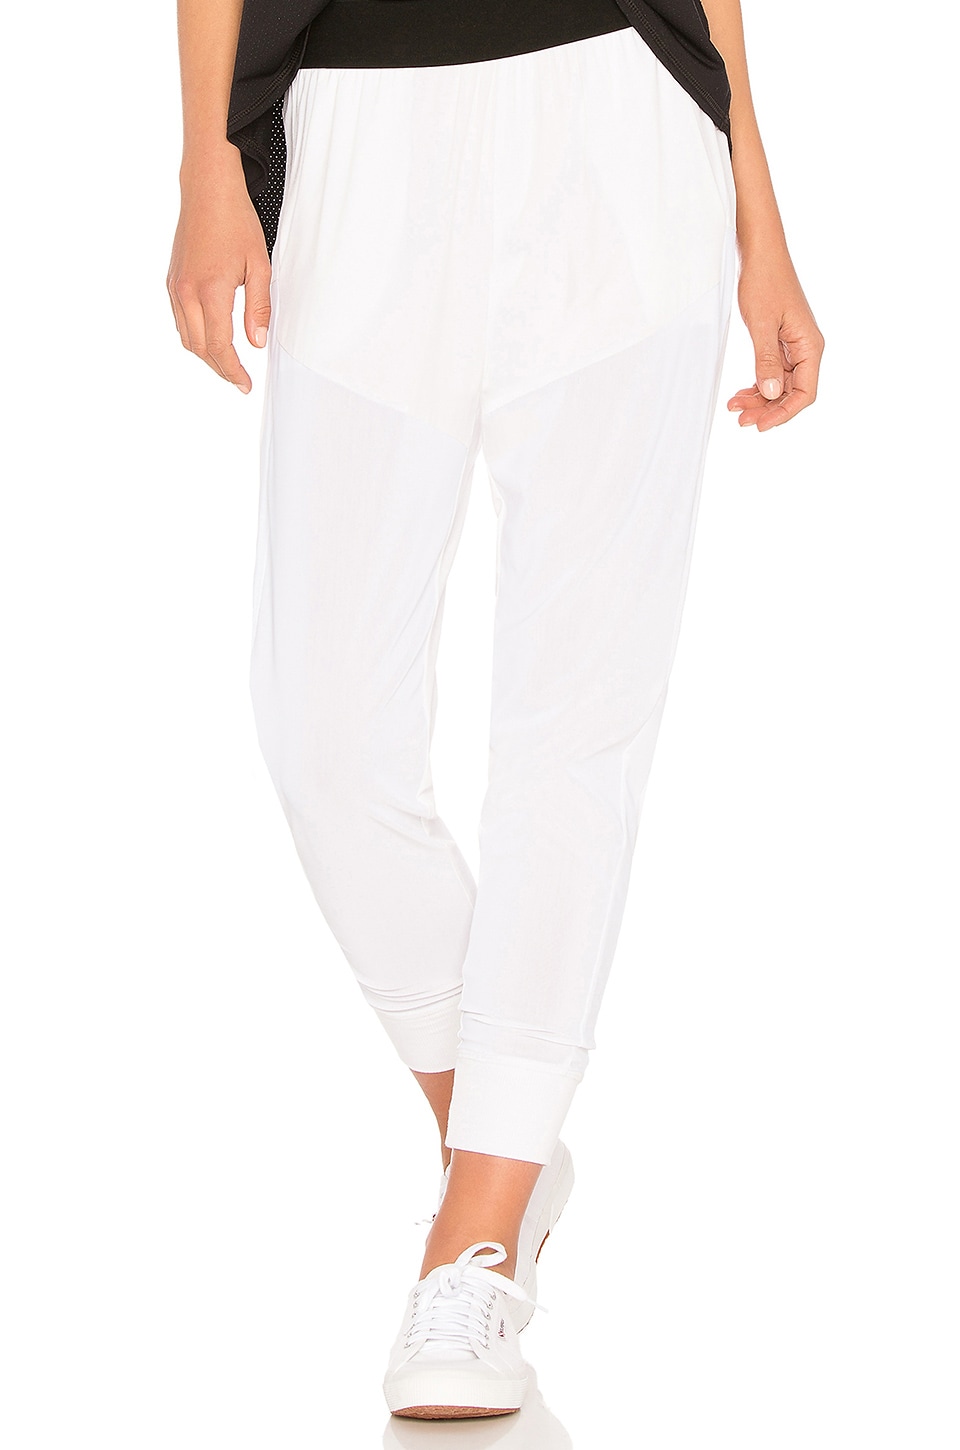 VIMMIA Unwind Mesh Front Pant